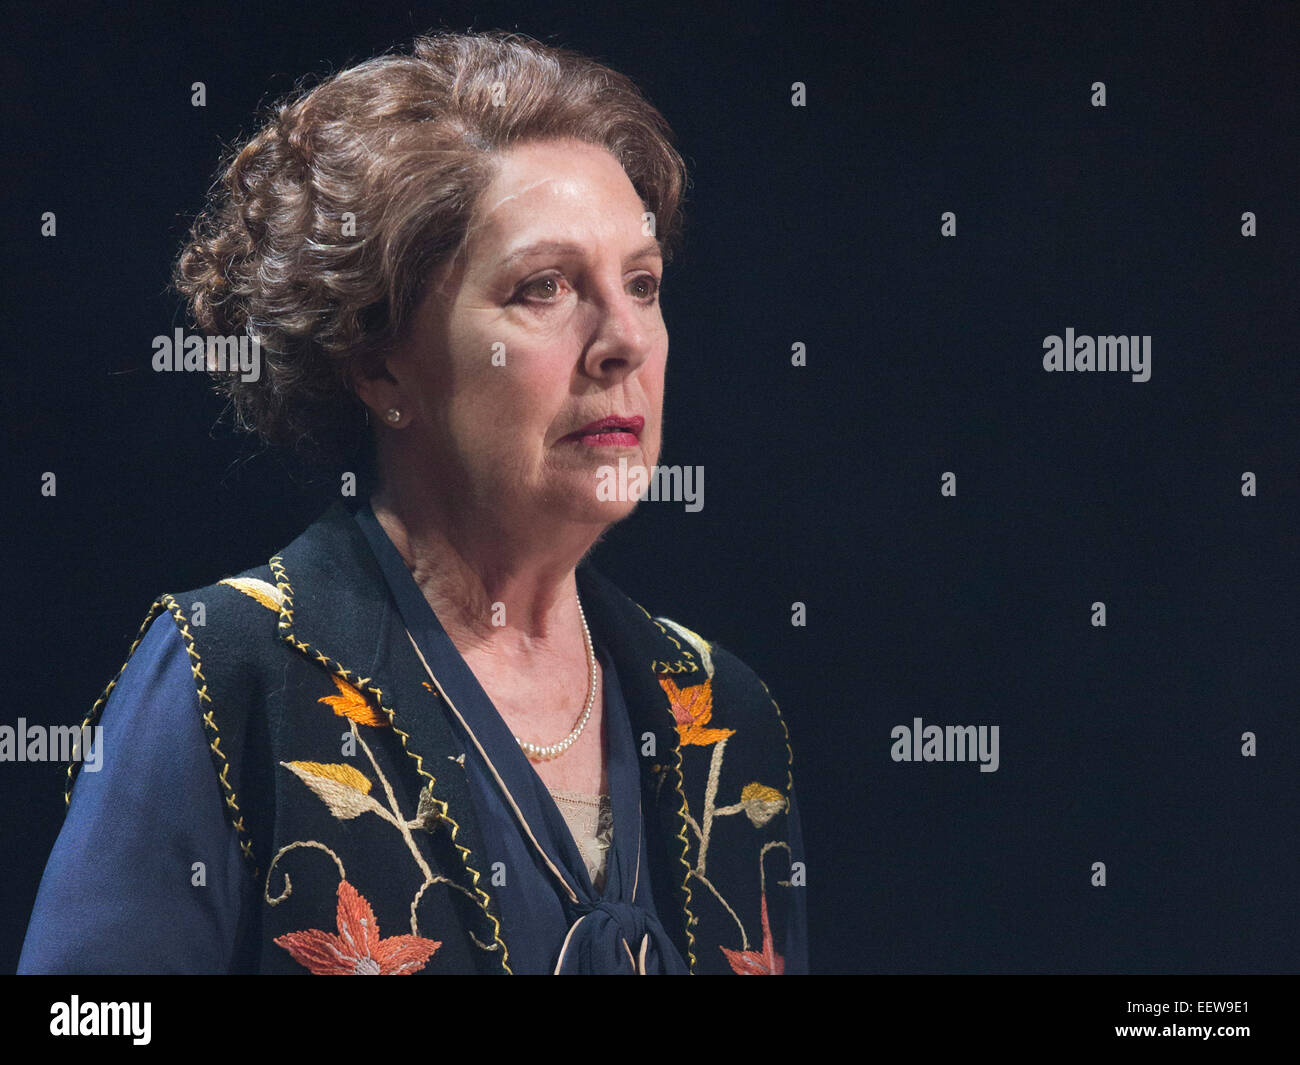 London, UK. 16 January 2015. Actor Penelope Wilton stars as Irmgard Litten in the new play 'Taken At Midnight' by Mark Hayhurst which transfers to Theatre Royal Haymarket after a sold-out season at Chichester Festival Theatre. The play is directed by Jonathan Church and runs from 15 January to 14 March 2015. Photo: Bettina Strenske Stock Photo